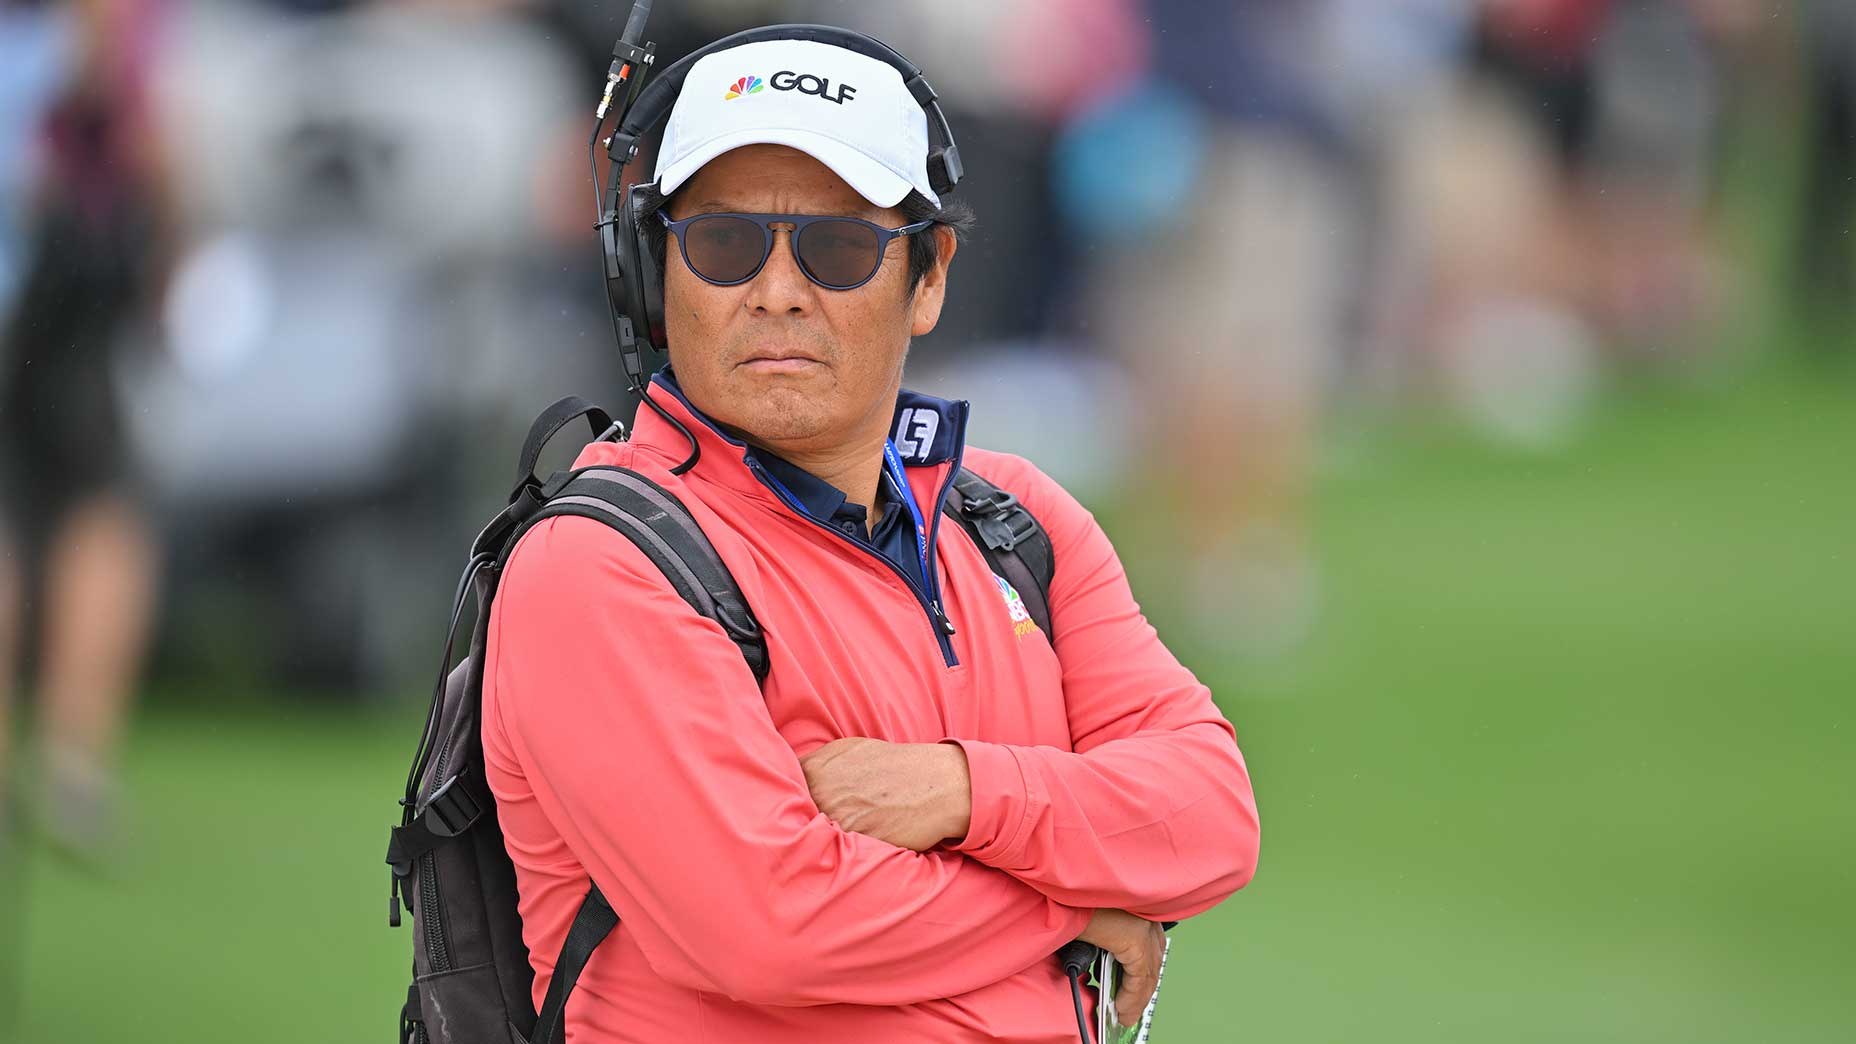 Notah Begay to take on role of lead analyst in NBC Sports ‘tryout’